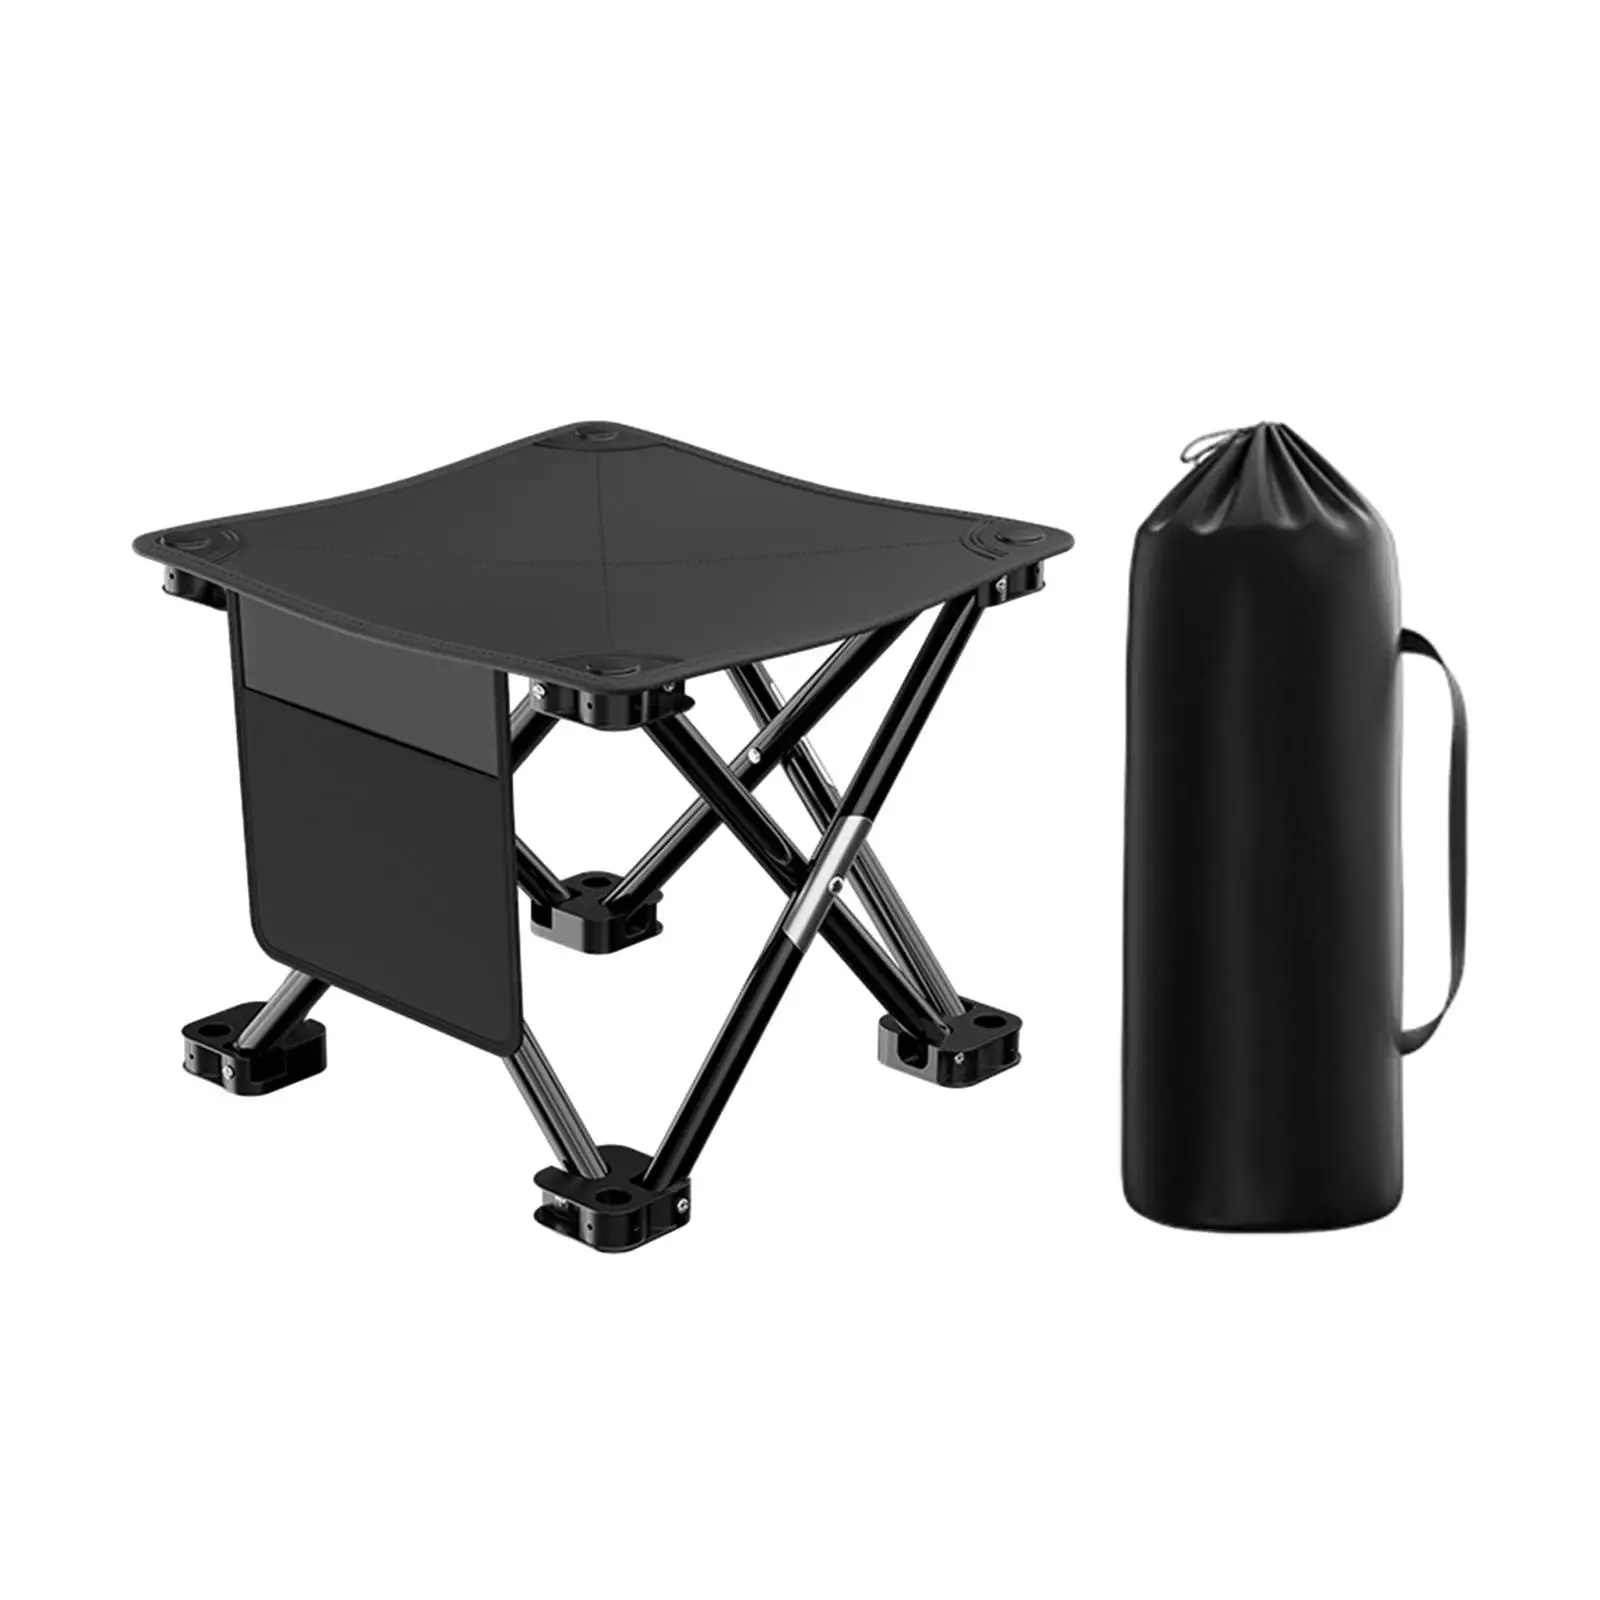 Camping Folding Stool Stable Lightweight Non Slip Foot Rest Foldable Footstool for Picnic Outdoor Traveling Garden Barbecue